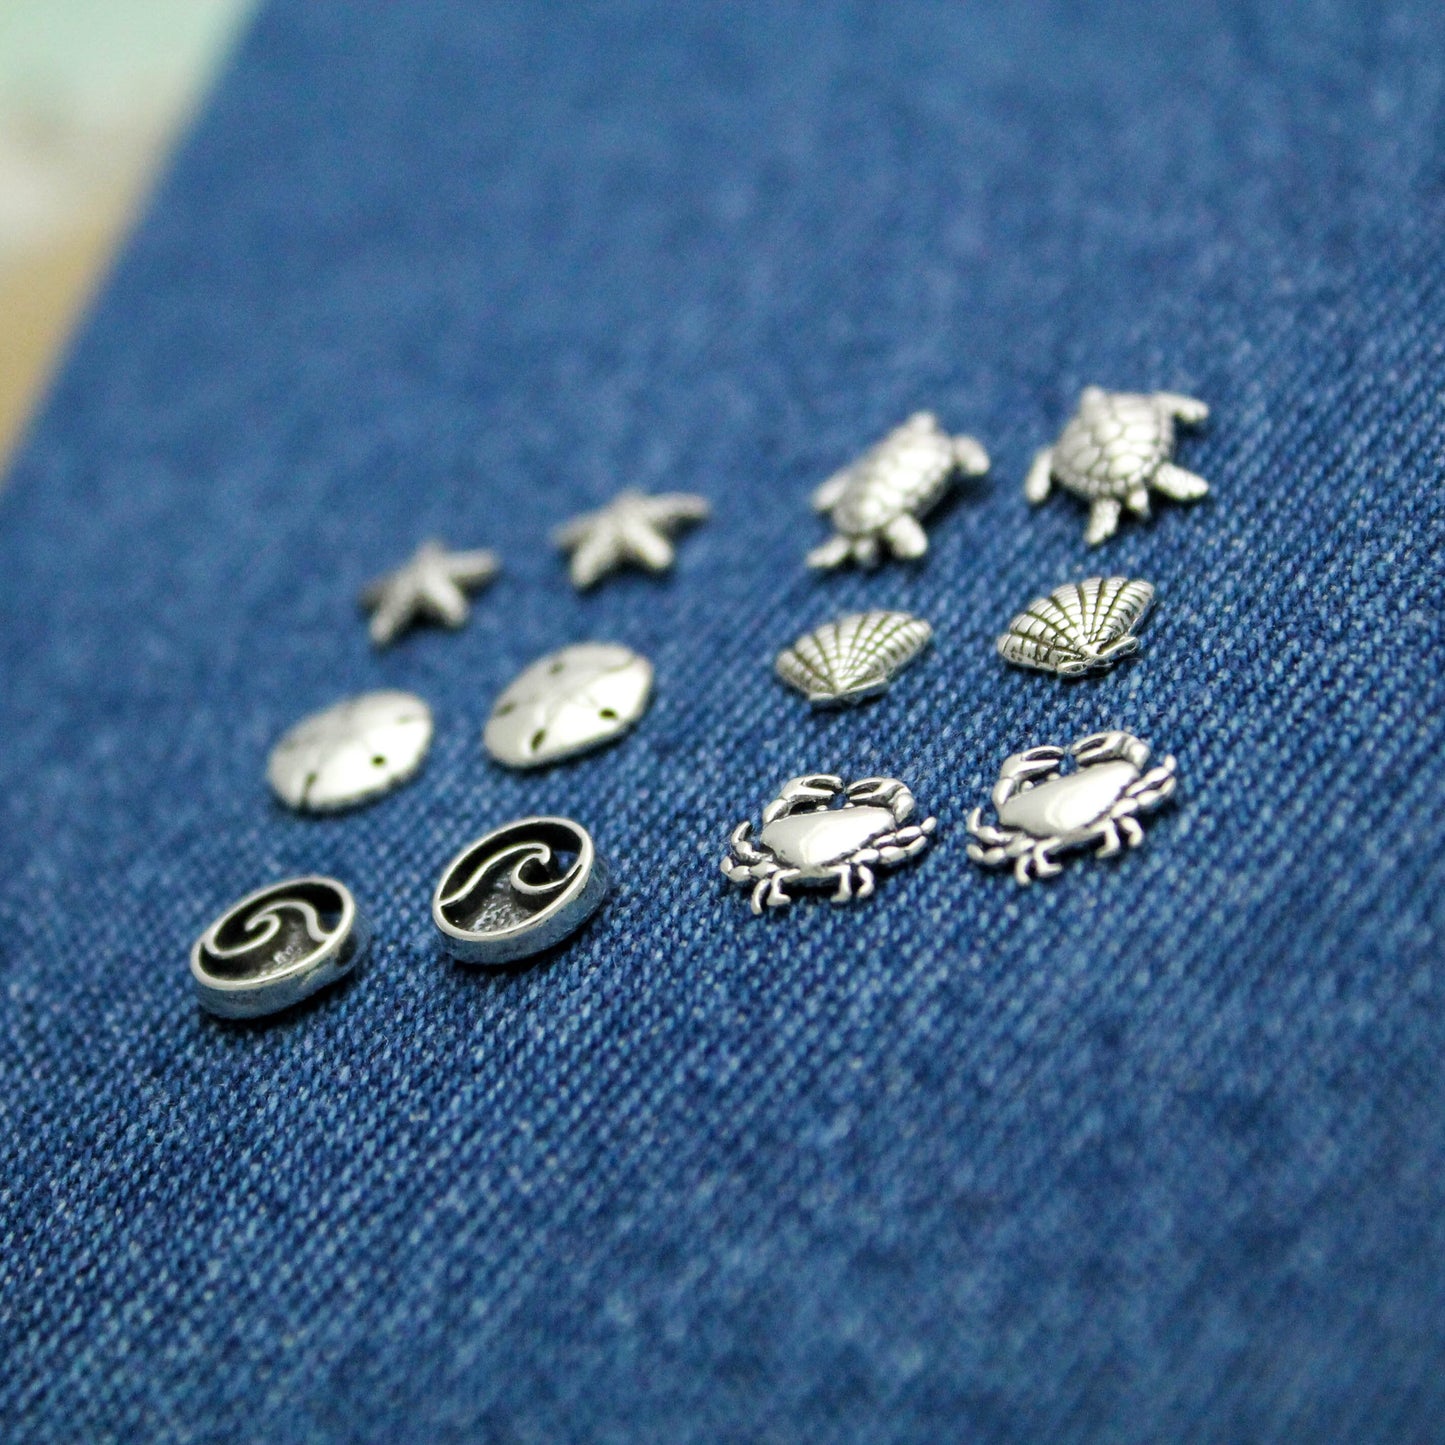 Cute Beach Studs in Sterling Silver, Waves, Crabs, Shells, Turtles, Starfish, & Sand dollar, Silver Stud Earrings, Cute Gift for Her